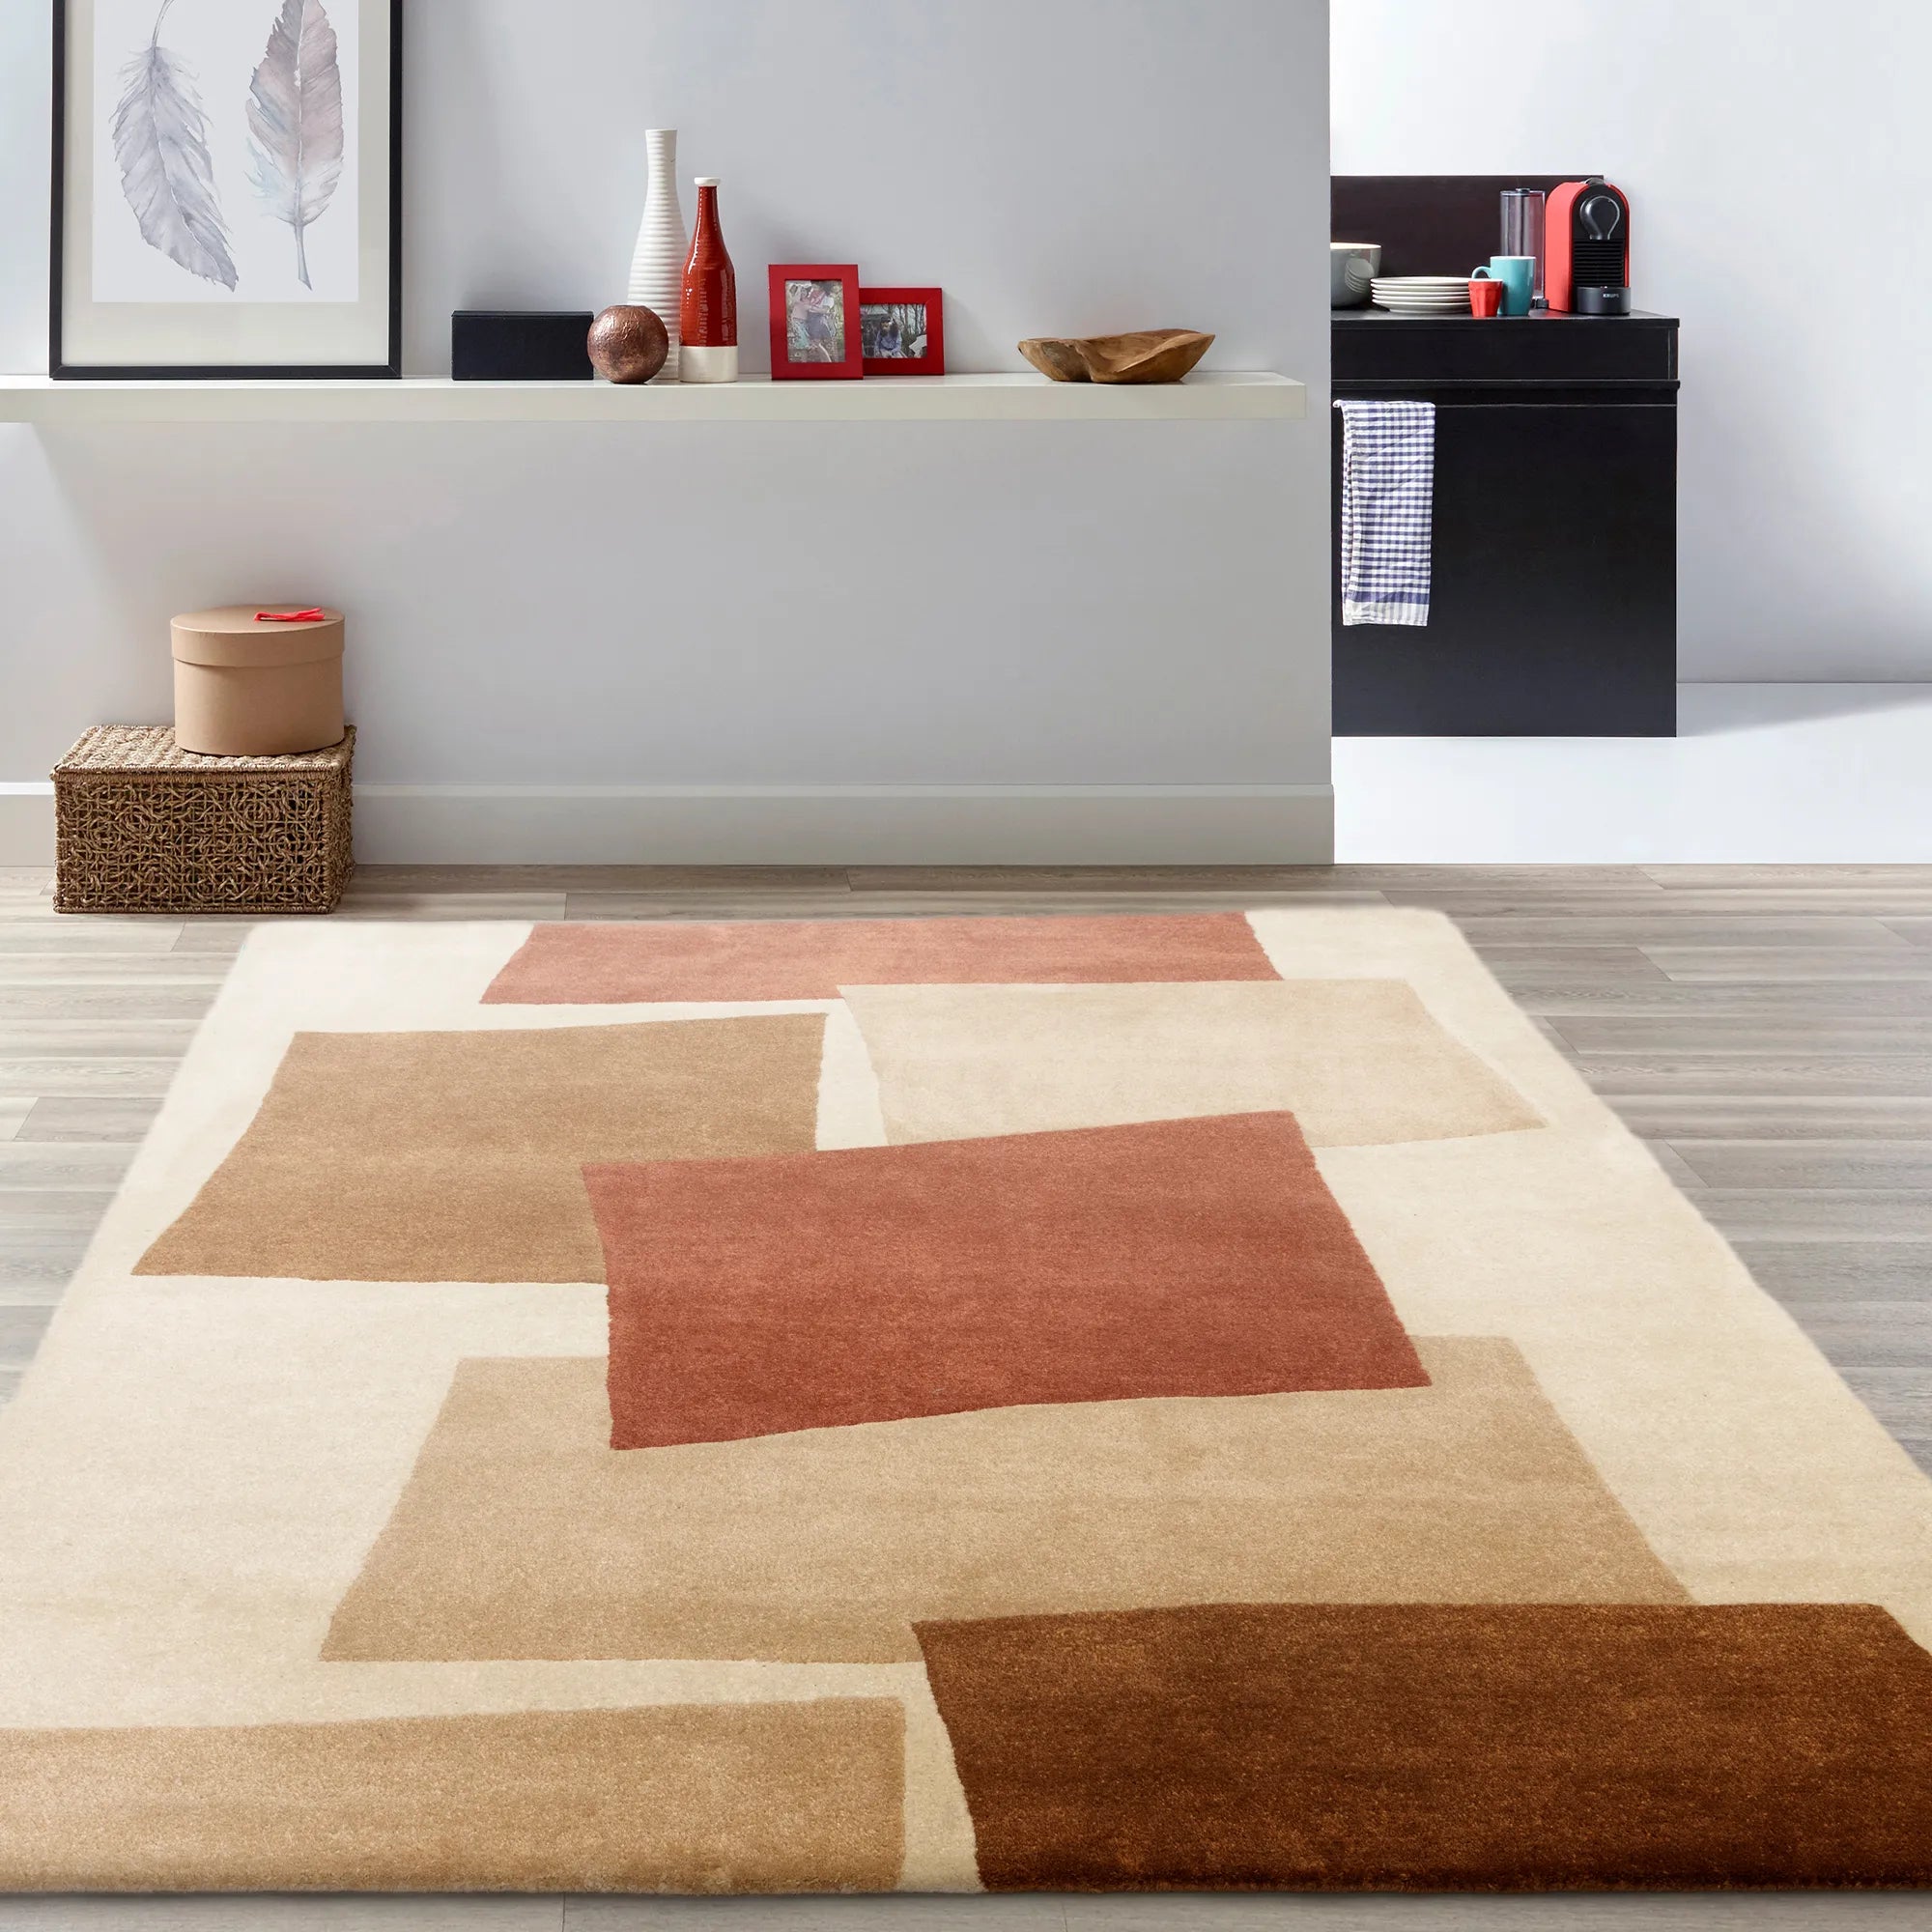 Red rug with an abstract rectangular pattern